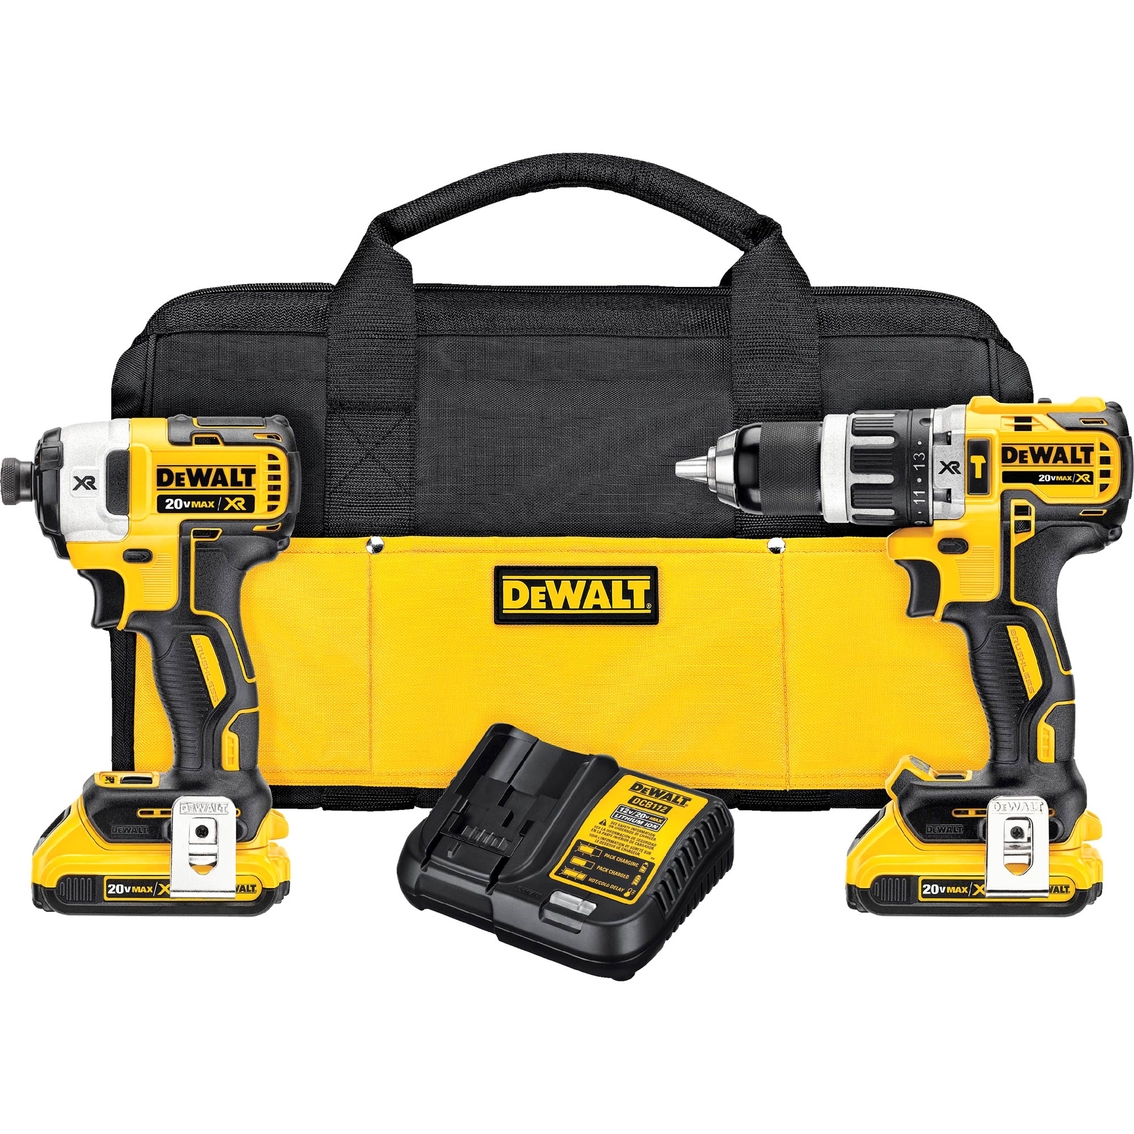 Military Dewalt Deals at AAFES 20v Max XR Brushless Compact Hammerdrill and Impact Driver Kit $230, XR COMPACT HIGH-TORQUE IMPACT WRENCH $150 and others